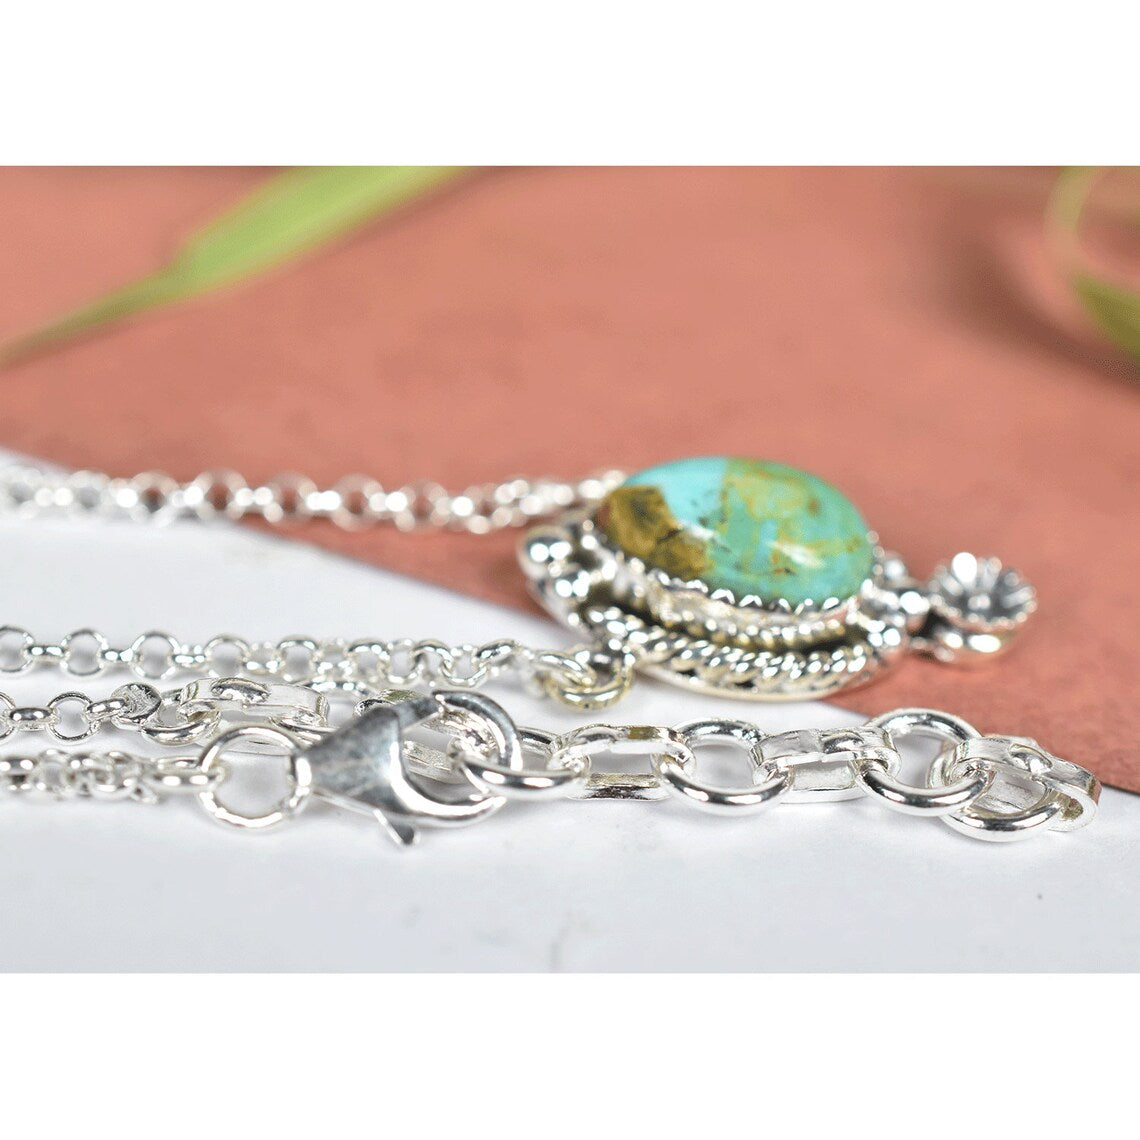 Vintage Mohave Turquoise Bohemian Pendant - 925 Sterling Silver Native American Pendant